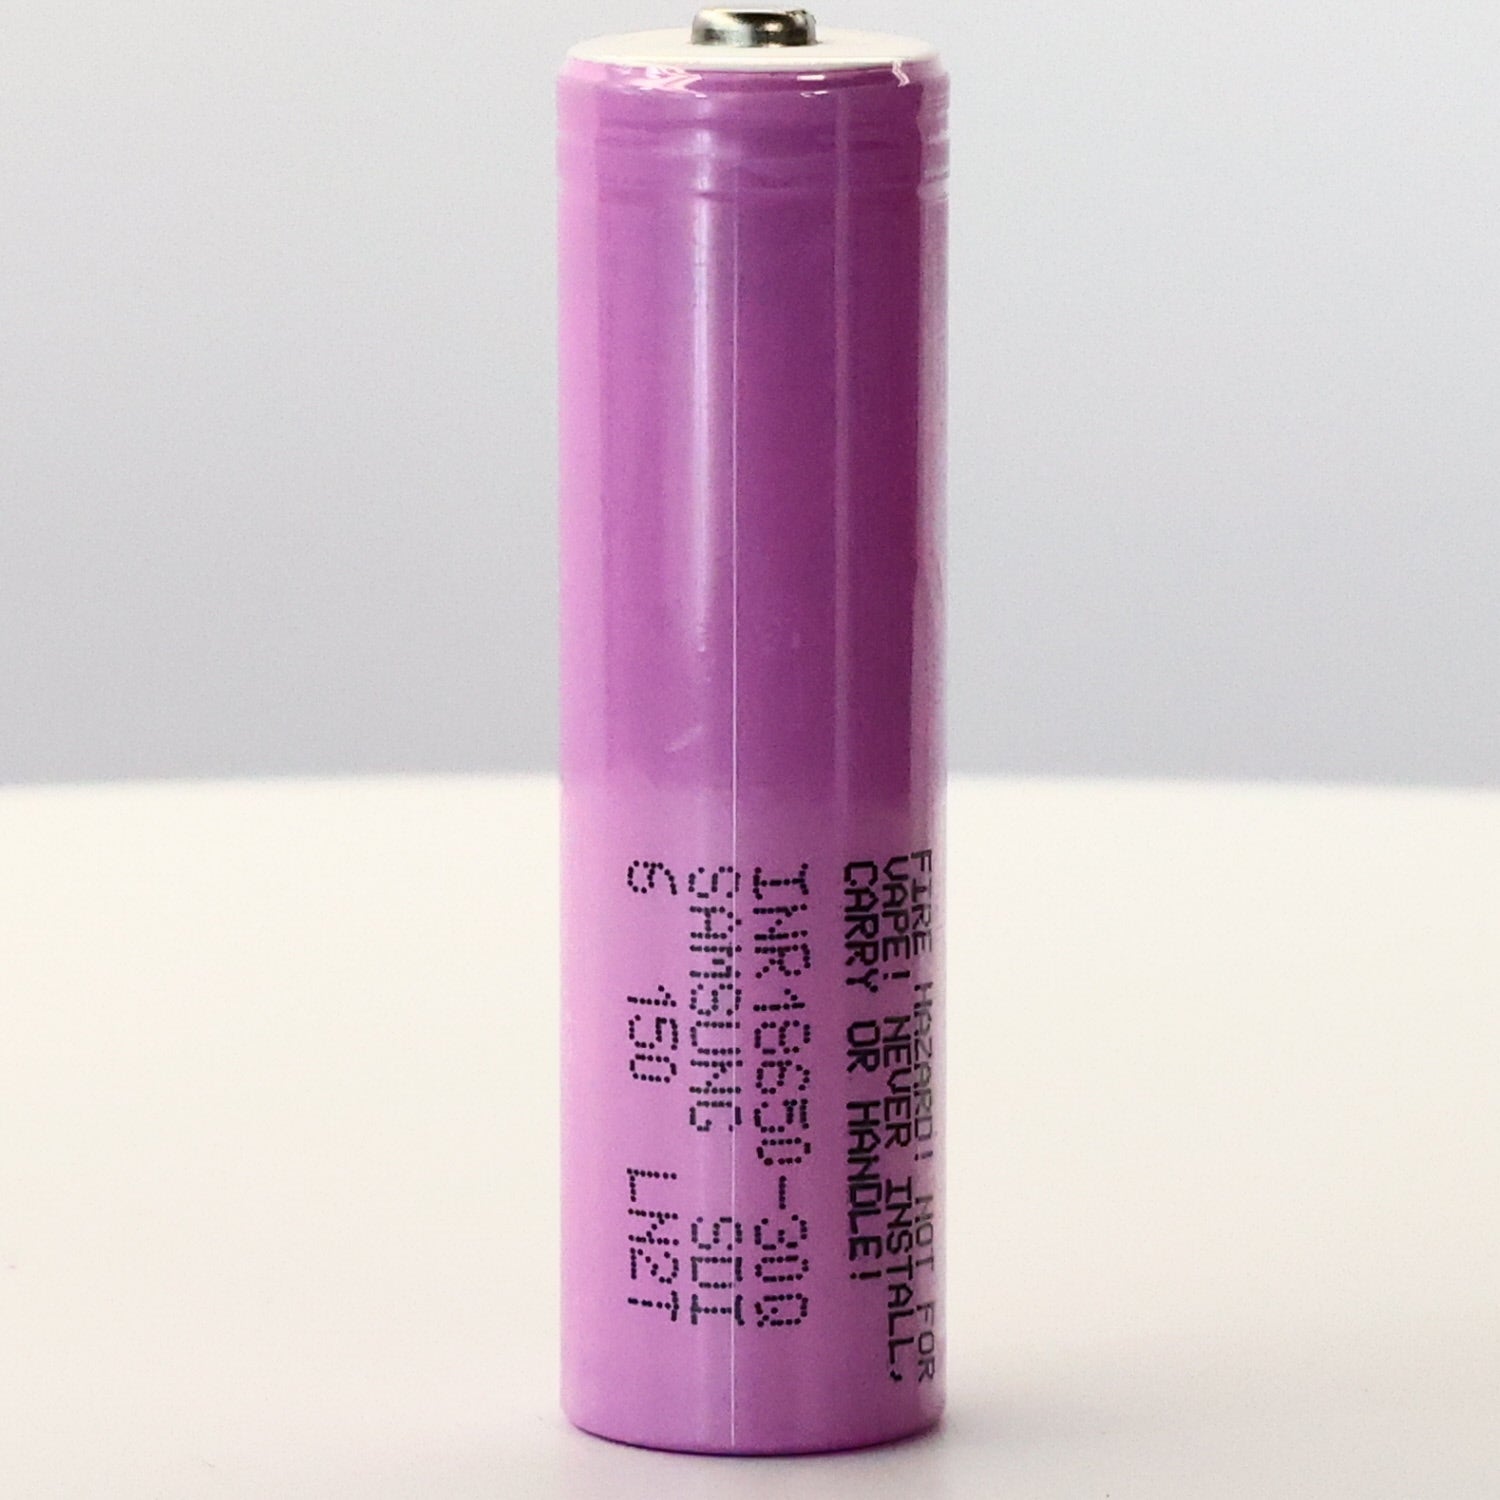 Samsung 18650 Batteries - High-Quality Power Solutions